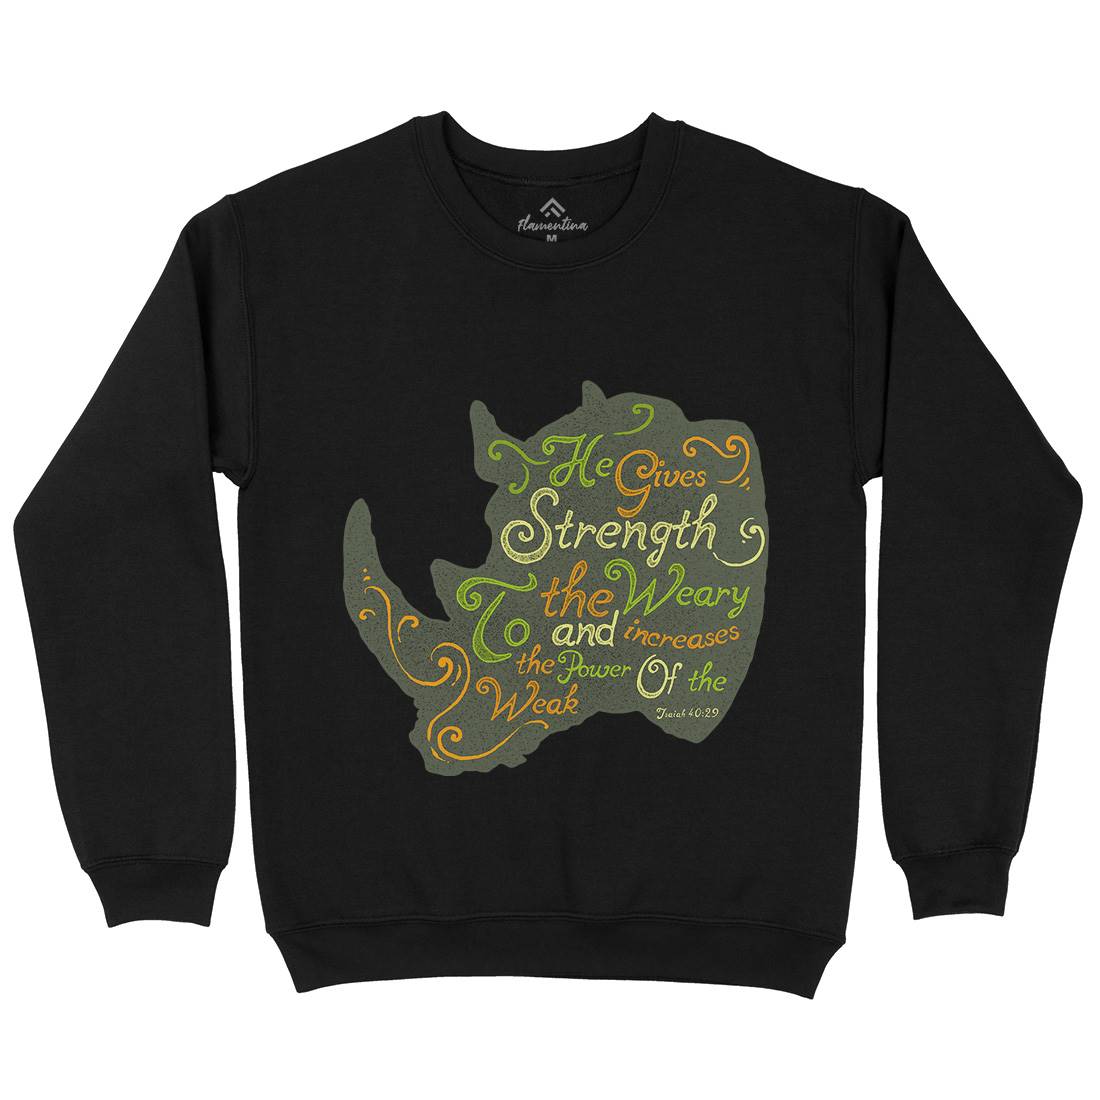 He Gives Strength Kids Crew Neck Sweatshirt Religion A325